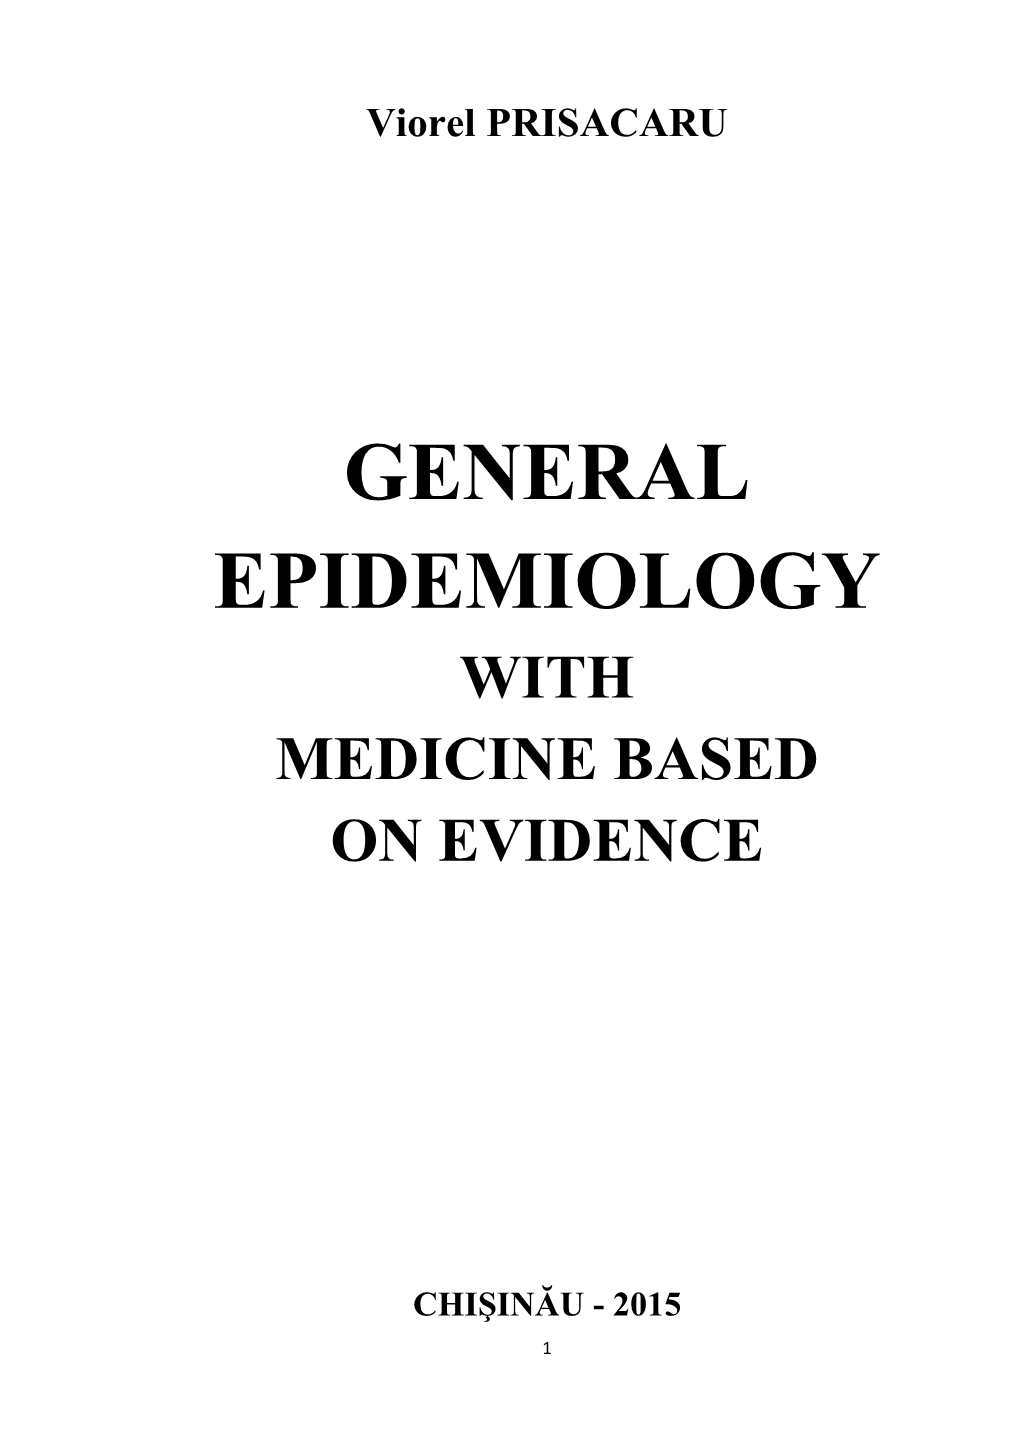 General Epidemiology with Medicine Based on Evidence